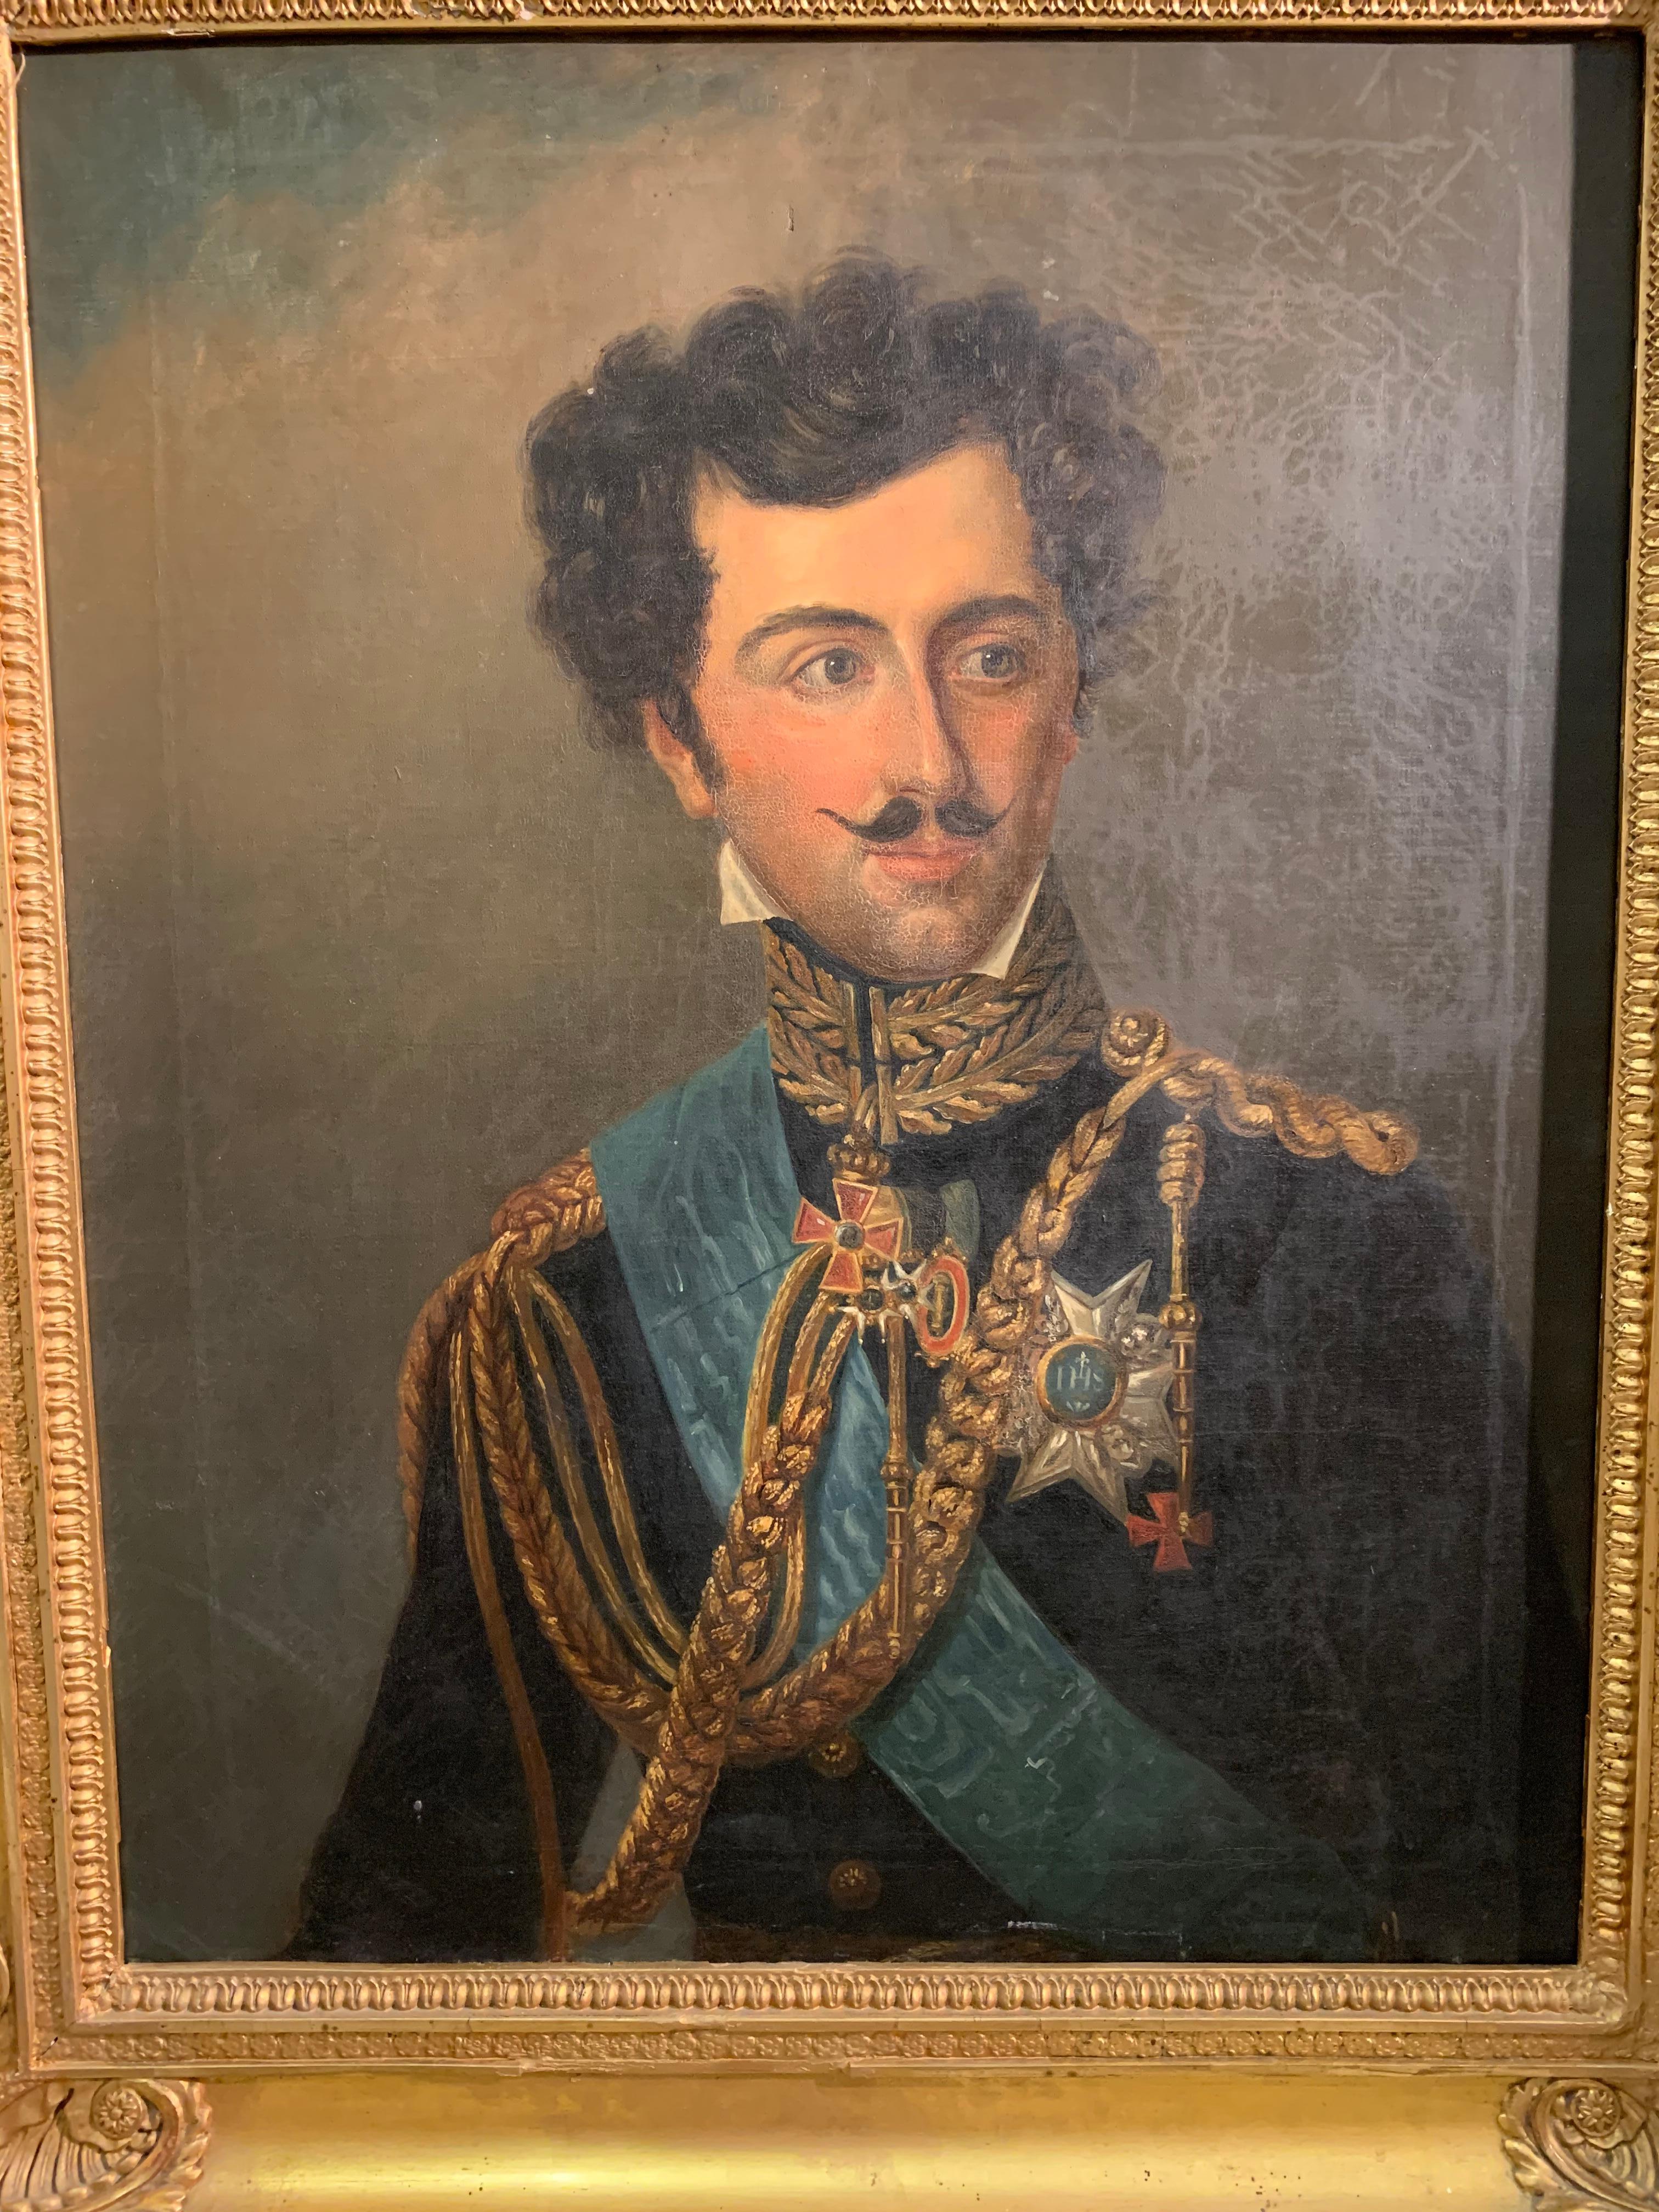 An imposing German oil painting on canvas of an officer set in a deep impressive gilt frame.
A most handsome gentleman with gold epaulettes, blue sash and various medals.
Circa 1850 and painted from the school of artist Josef Karl Stieler who